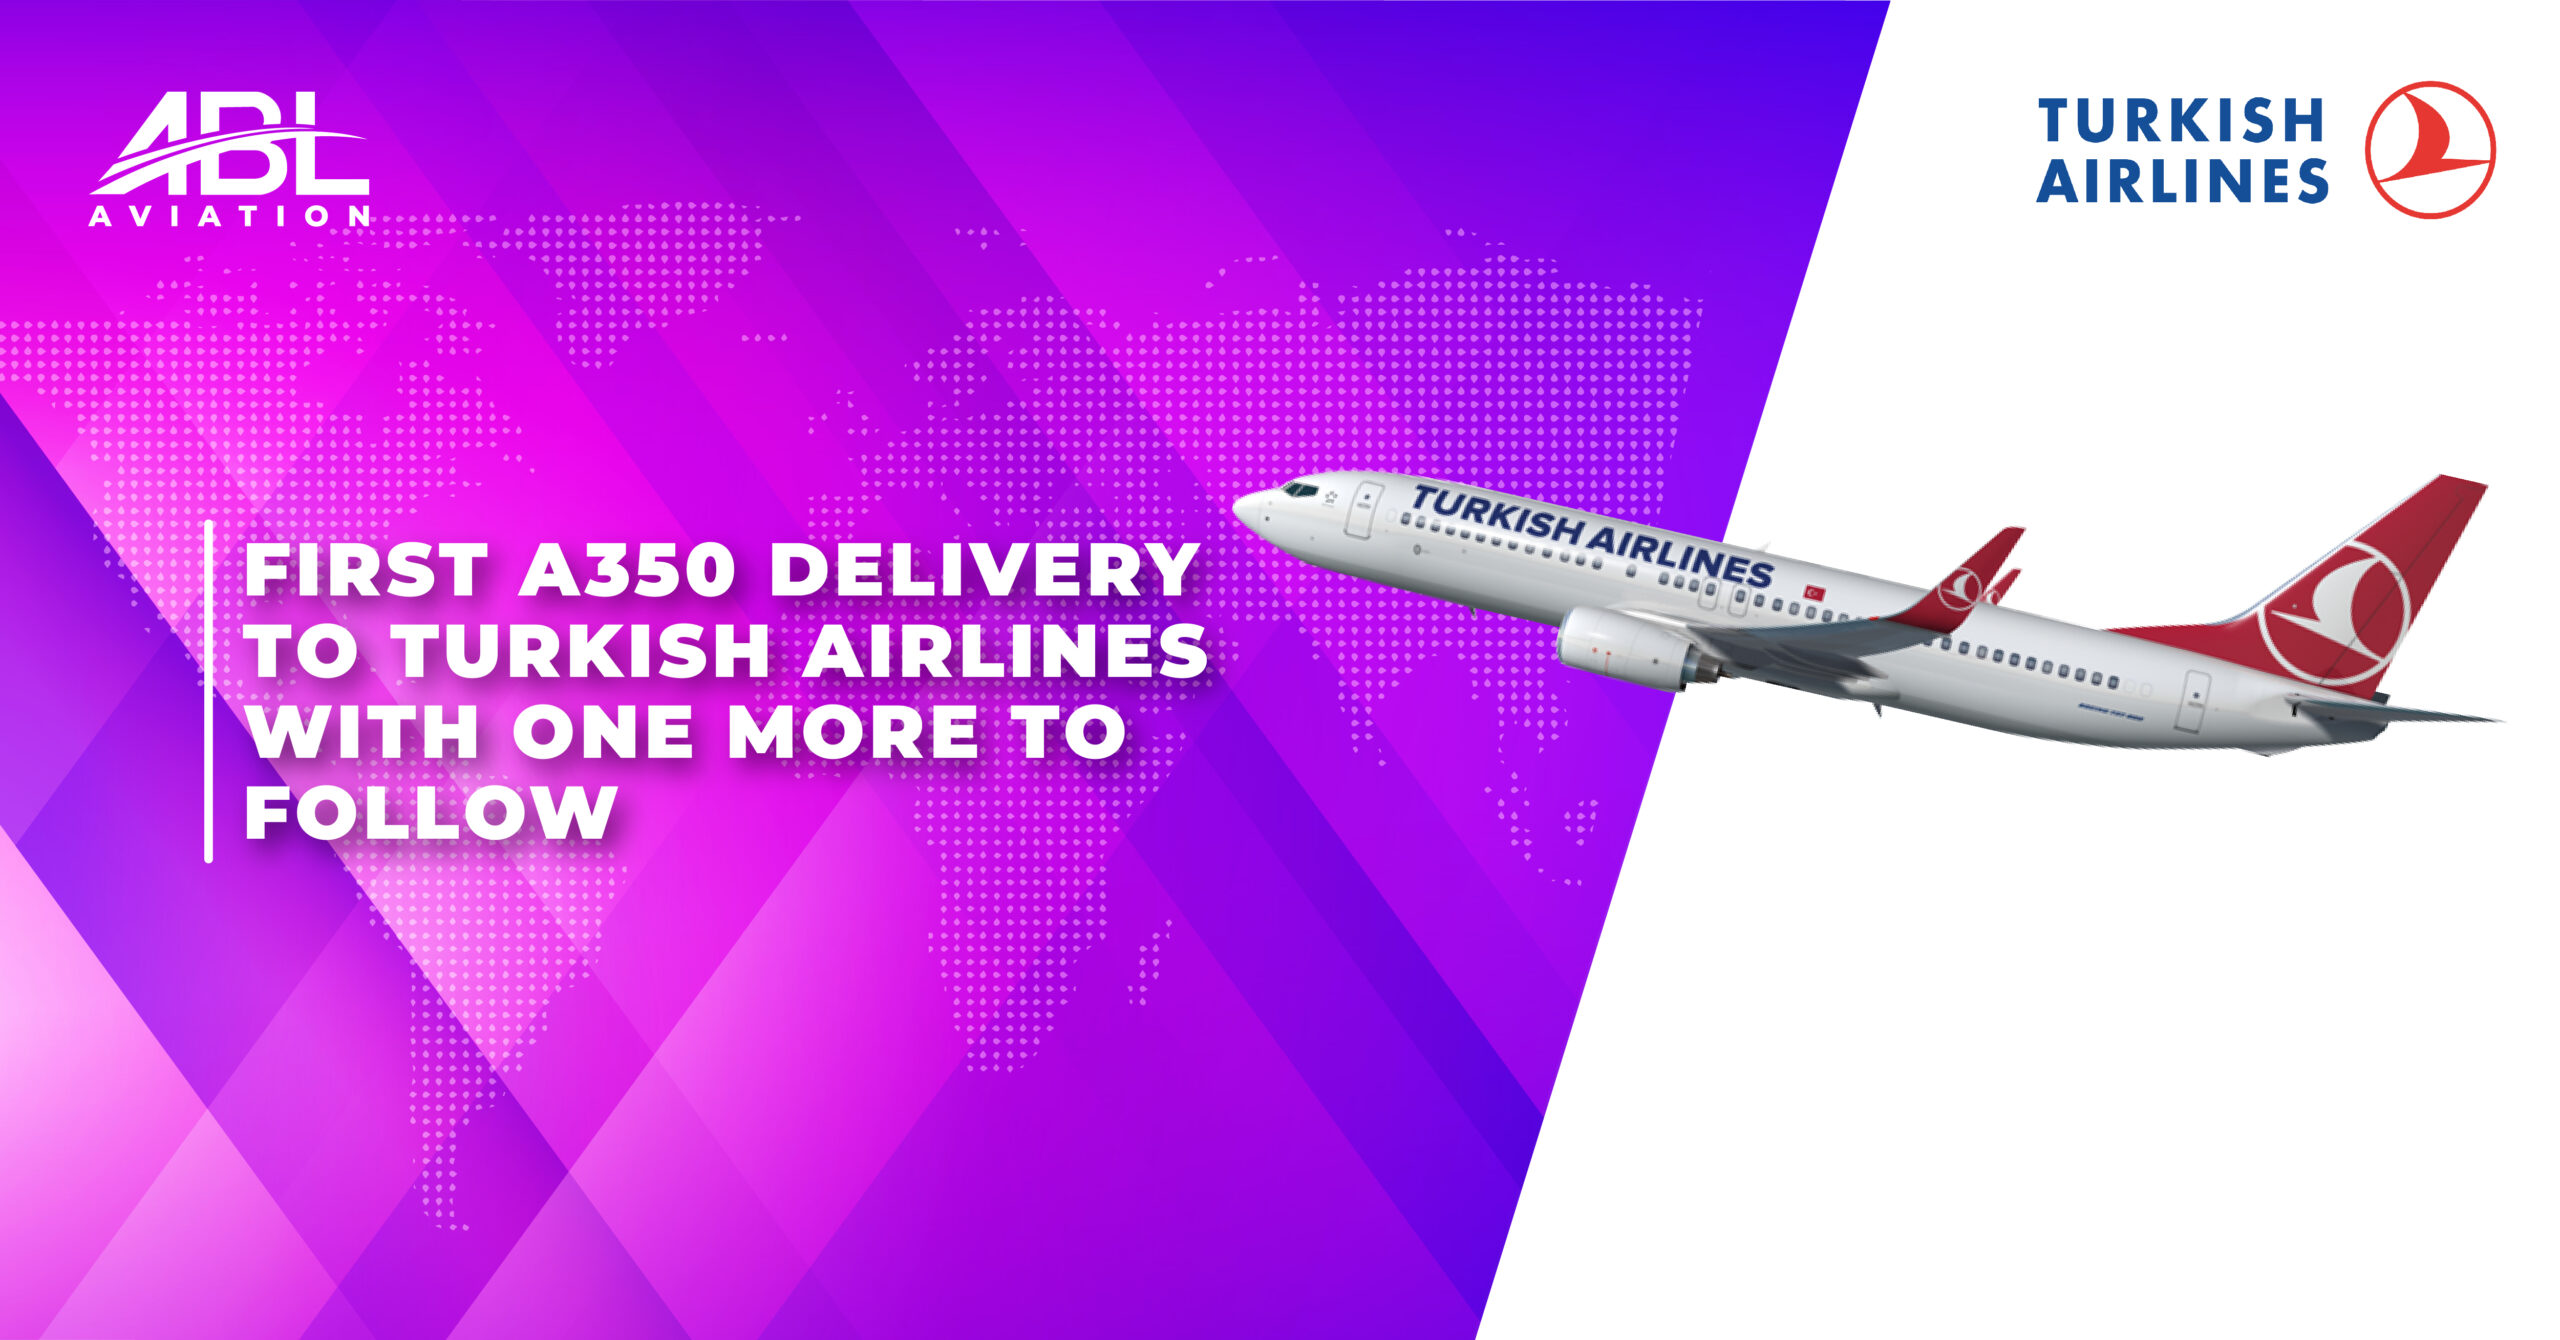 ABL Aviation Secures First A350 Aircraft Delivery to Turkish Airlines With One More to Follow